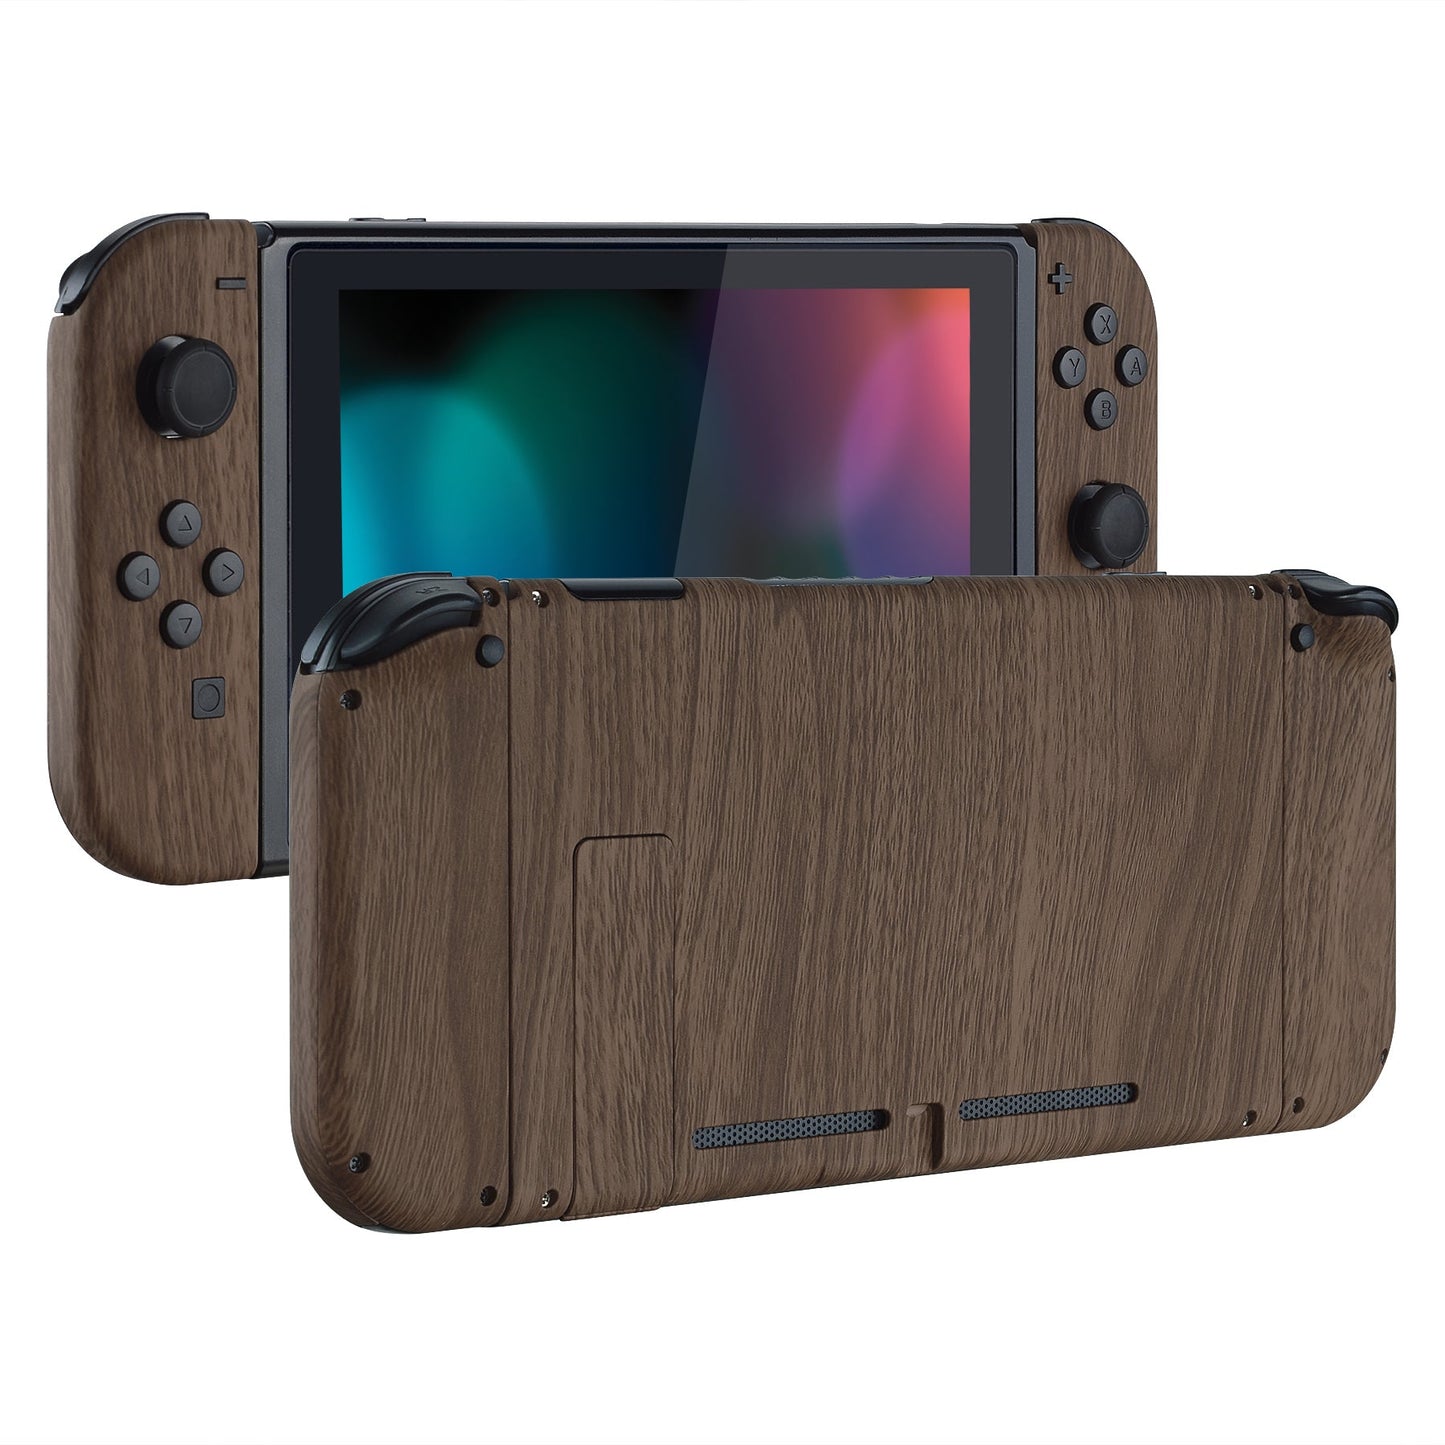 eXtremeRate Retail Soft Touch Grip Back Plate for Nintendo Switch Console, NS Joycon Handheld Controller Housing with Full Set Buttons, DIY Replacement Shell for Nintendo Switch - Wood Grain - QS201